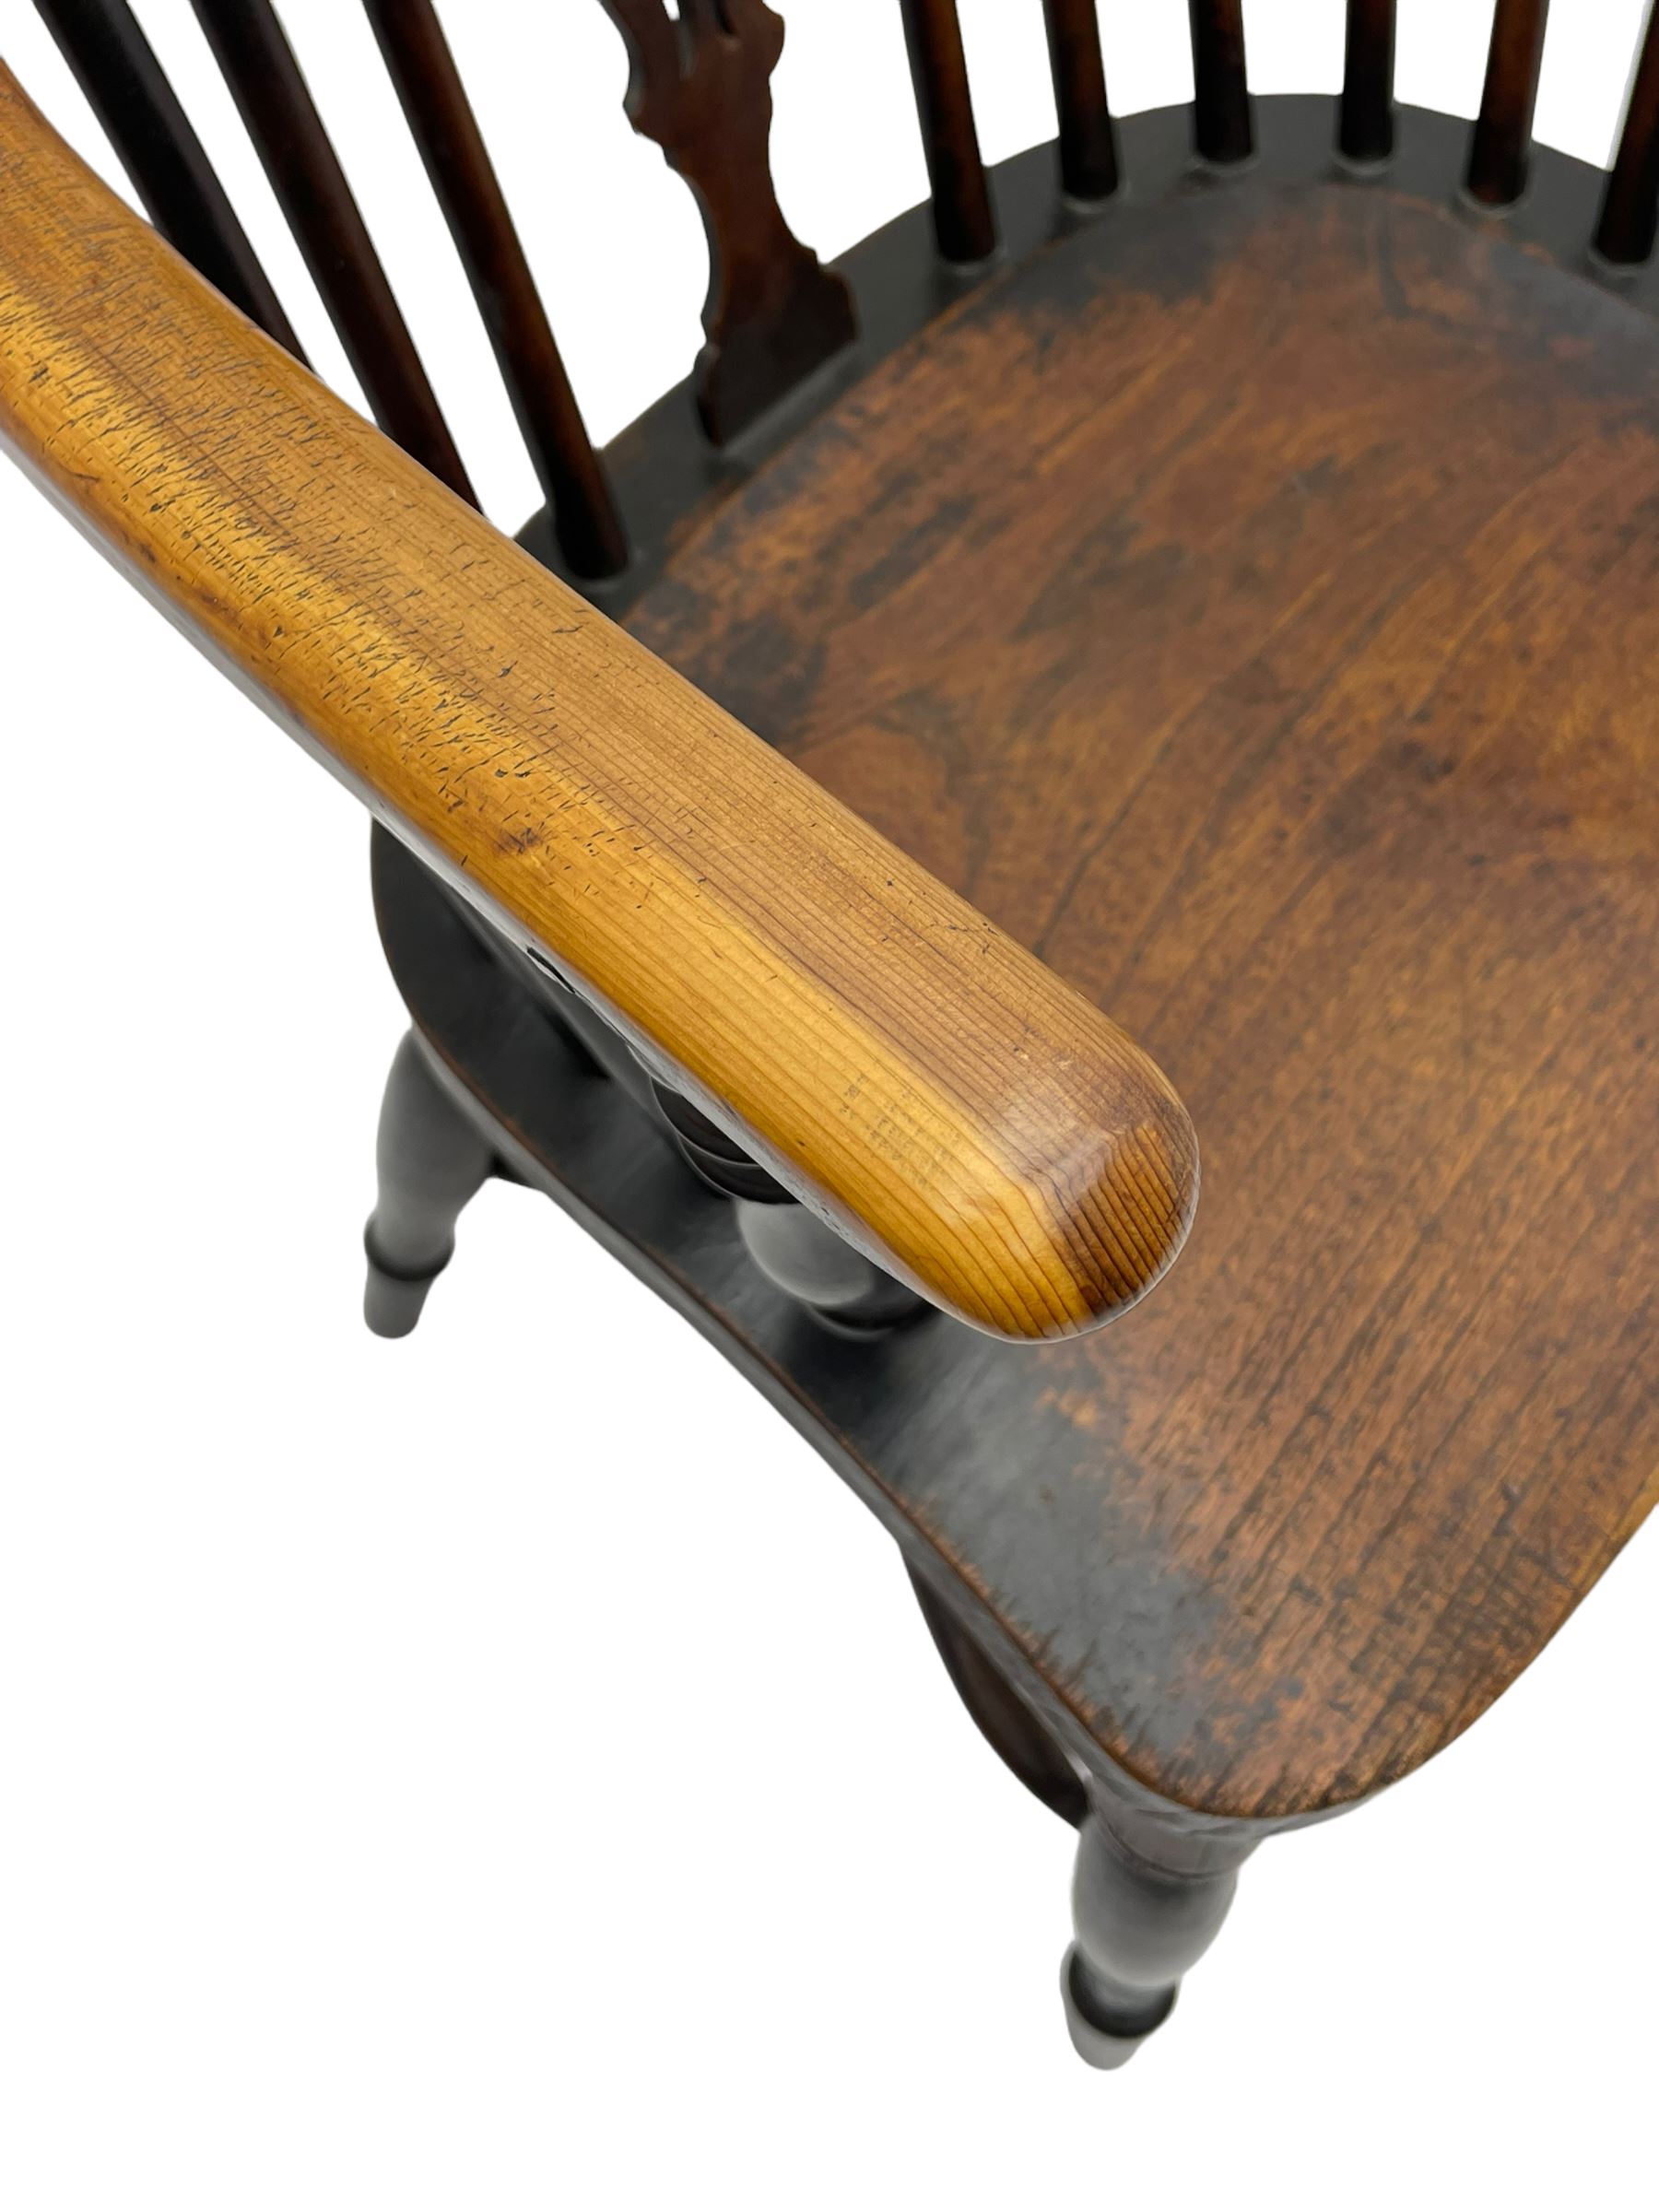 19th century yew wood and elm Windsor chair - Image 9 of 9